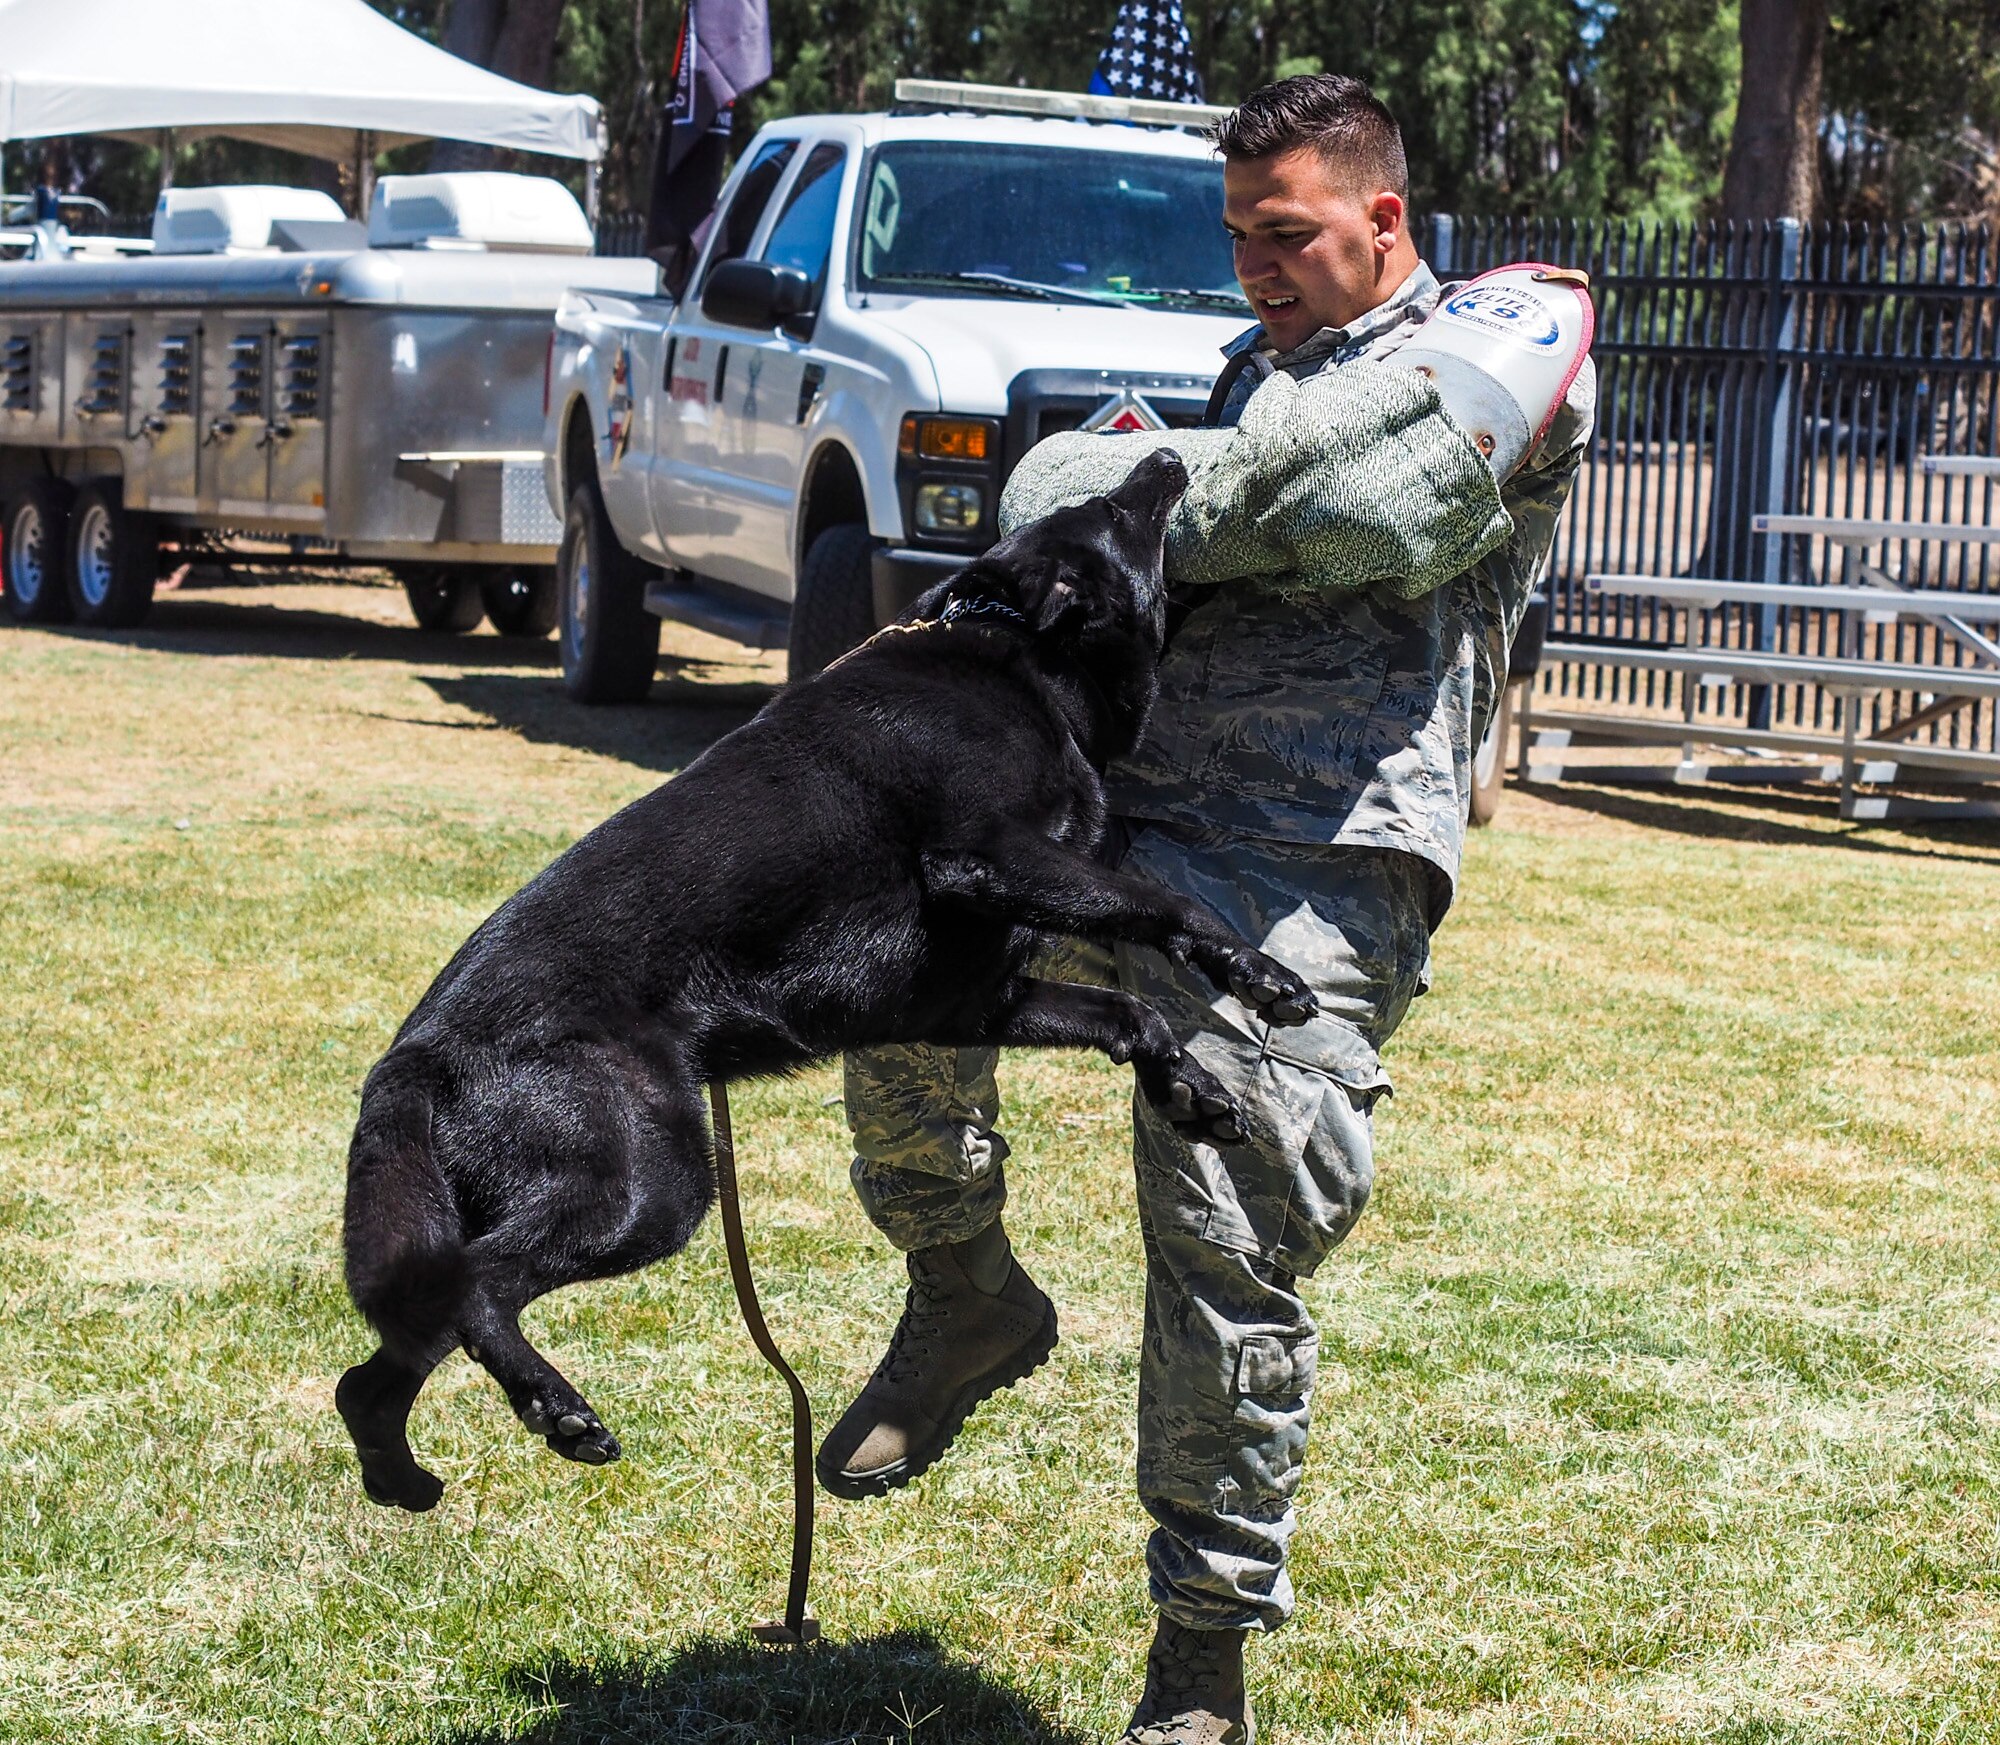 An Airman assigned to the 99th Security Forces Squadron demonstrates the abilities of his K-9 at the American Patriot Festival in Las Vegas, May 21, 2017. Airmen from Nellis and Creech Air Force Bases participated in the festival to show off K-9 units, Explosive Ordinance Disposal teams and a static MQ-1 Predator Drone. (U.S. Air Force photo by Master Sgt. Heidi West/Released)